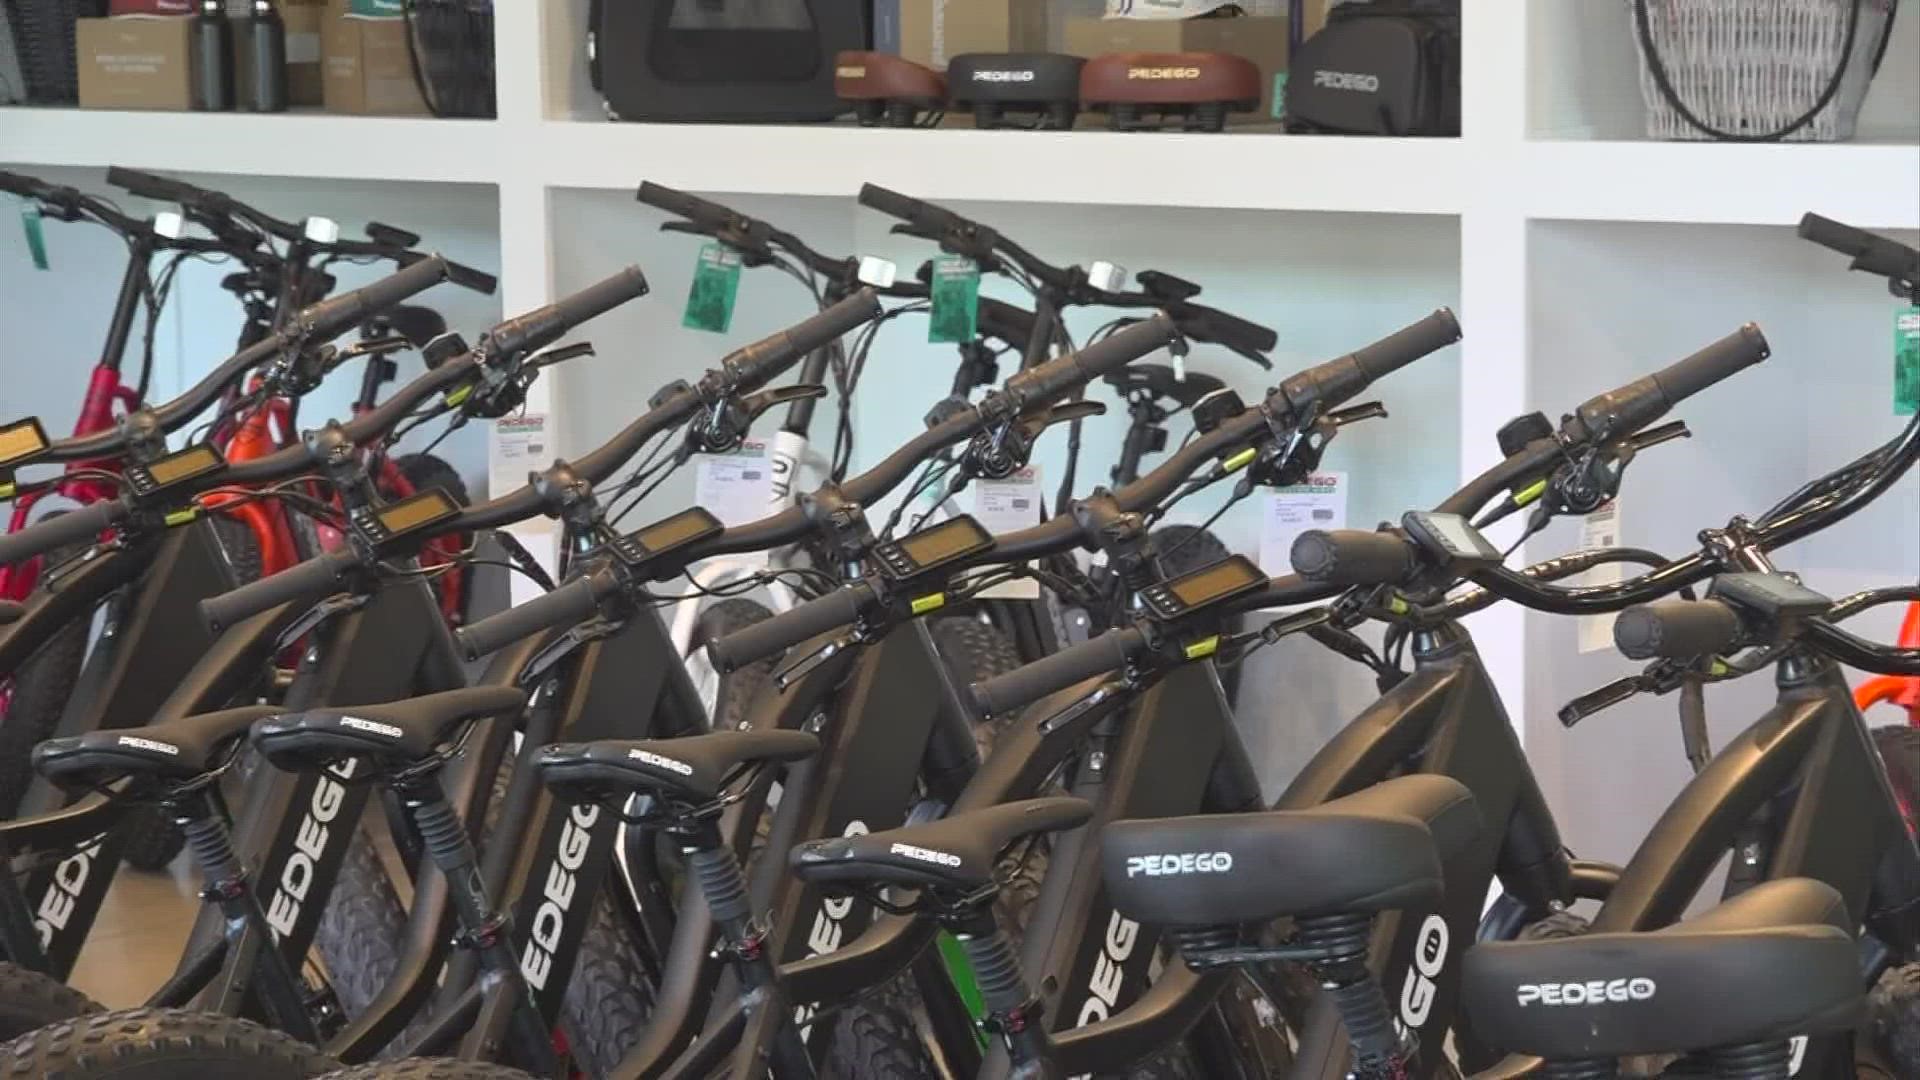 As gas prices continue to increase across the nation, some residents are turning to electric bicycles as supplemental transportation.